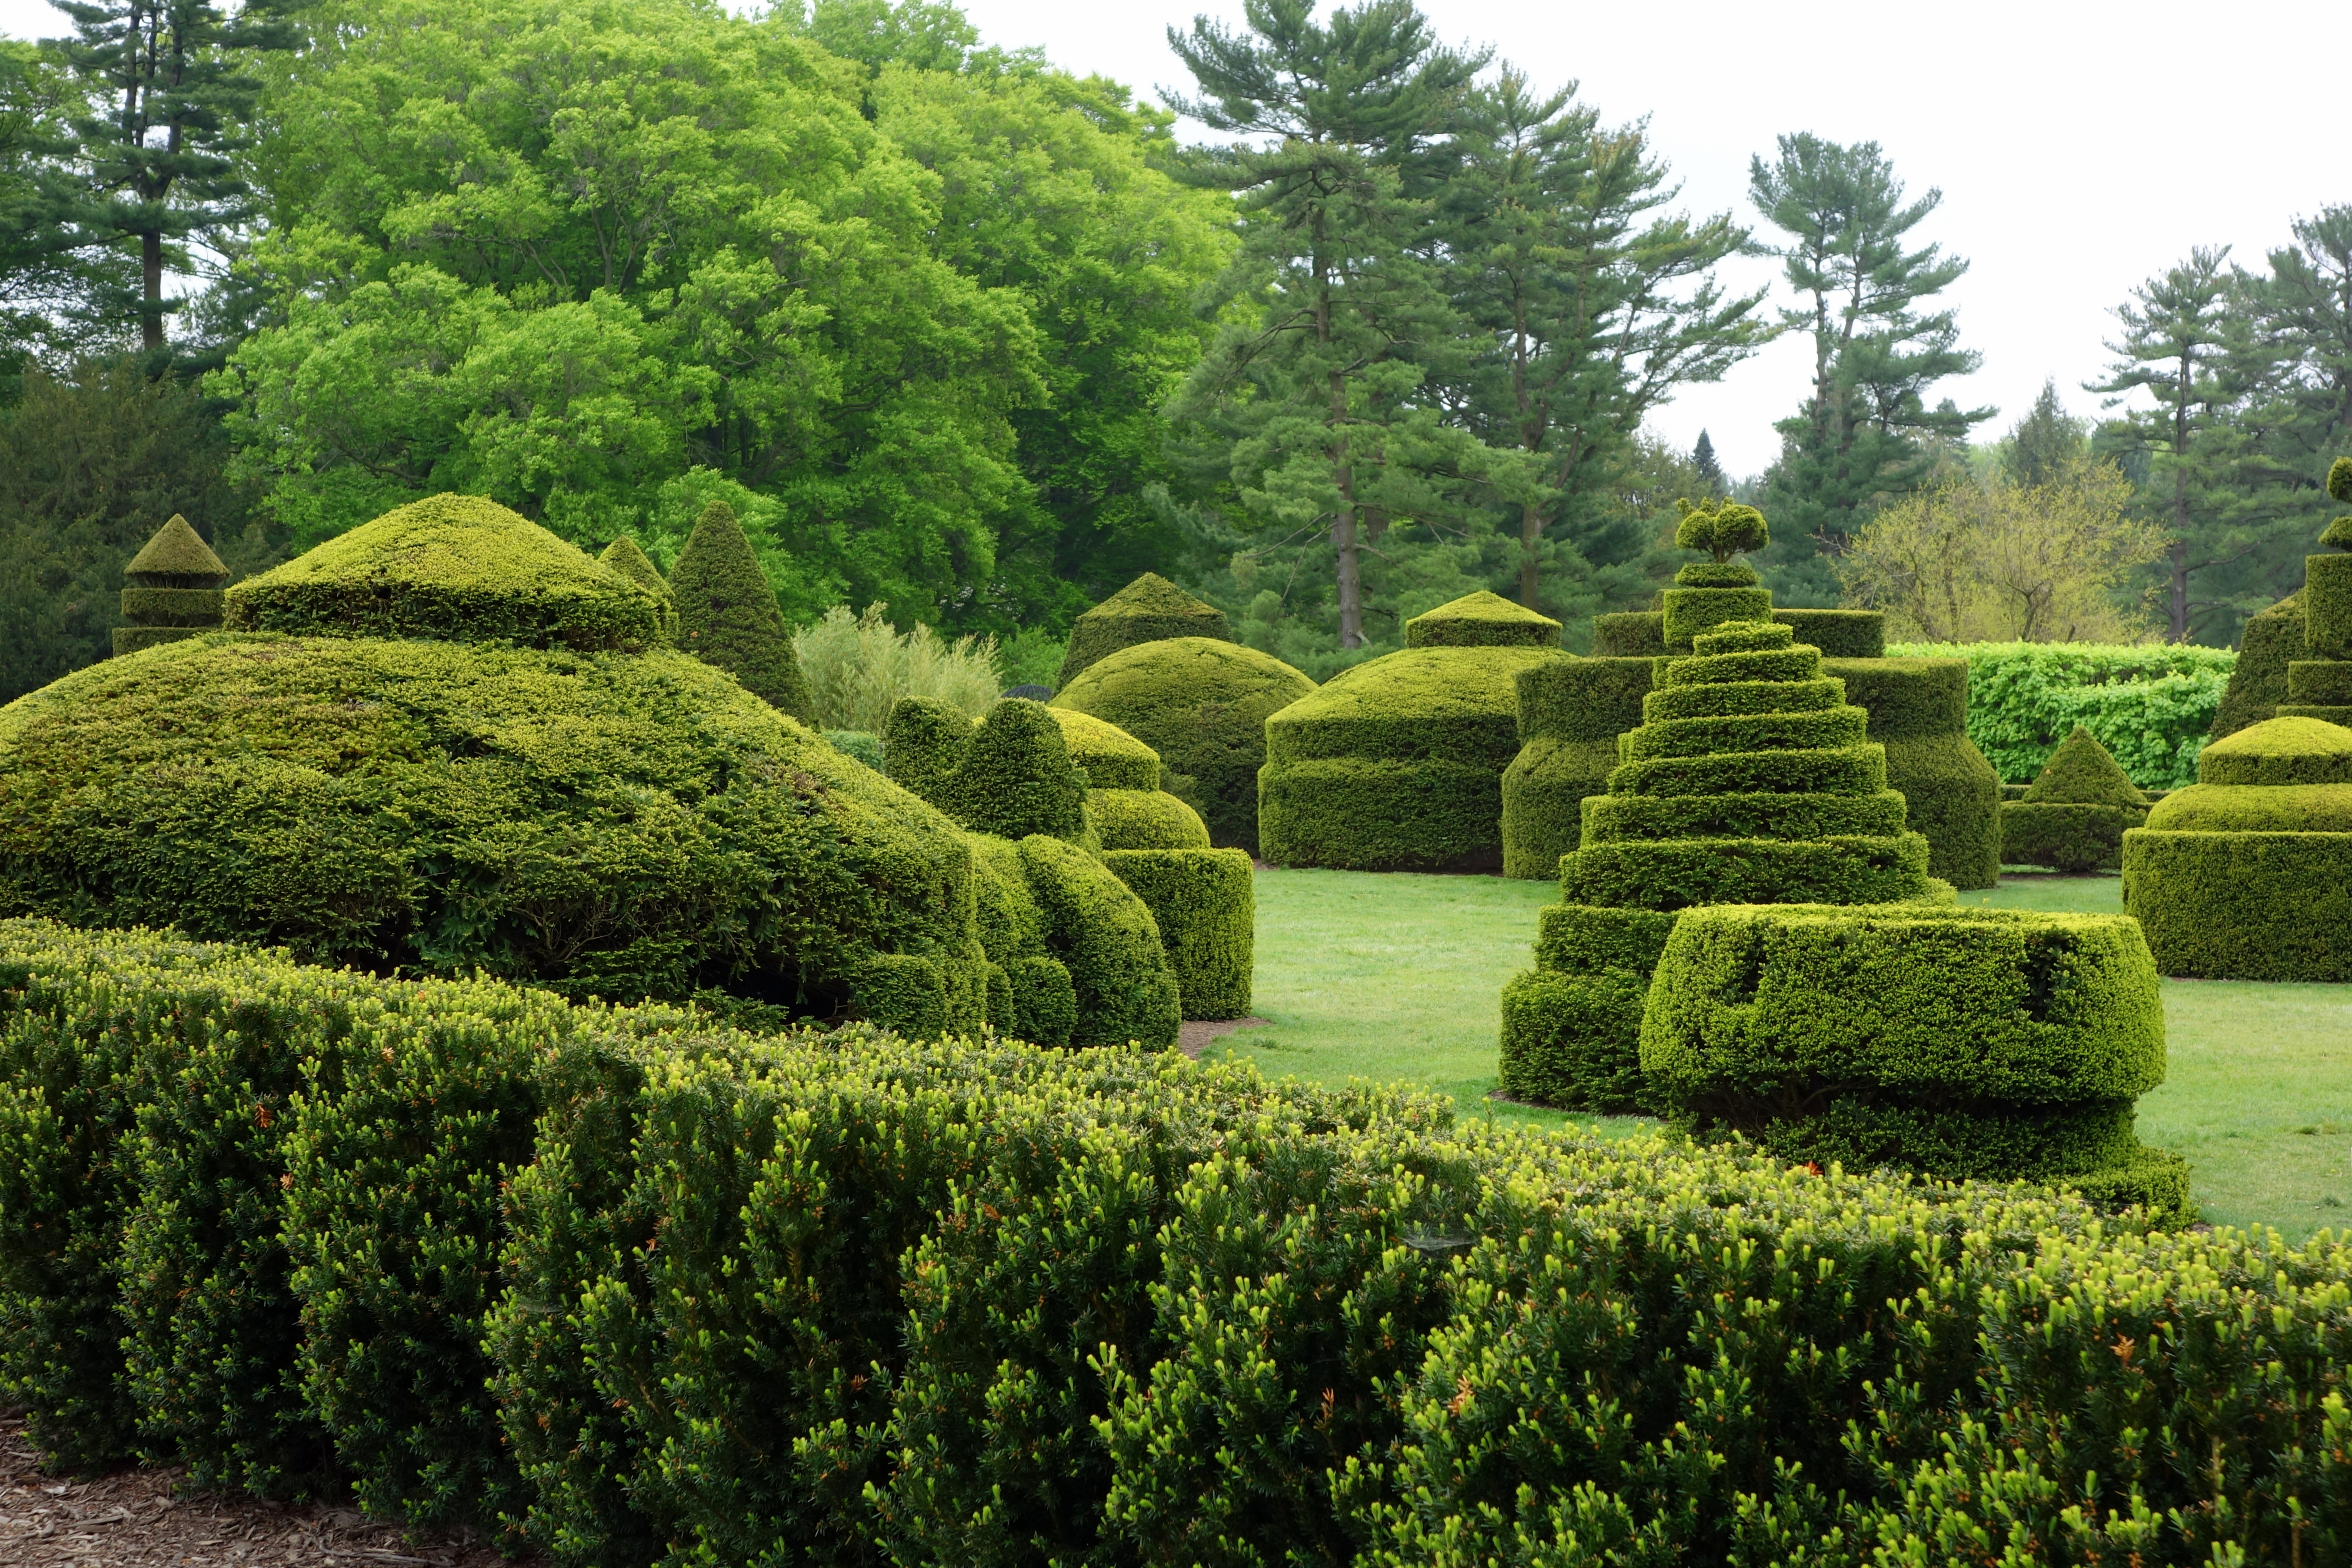 980 New topiary at longwood gardens 108 Description Topiary   Longwood Gardens   DSC00850.JPG 